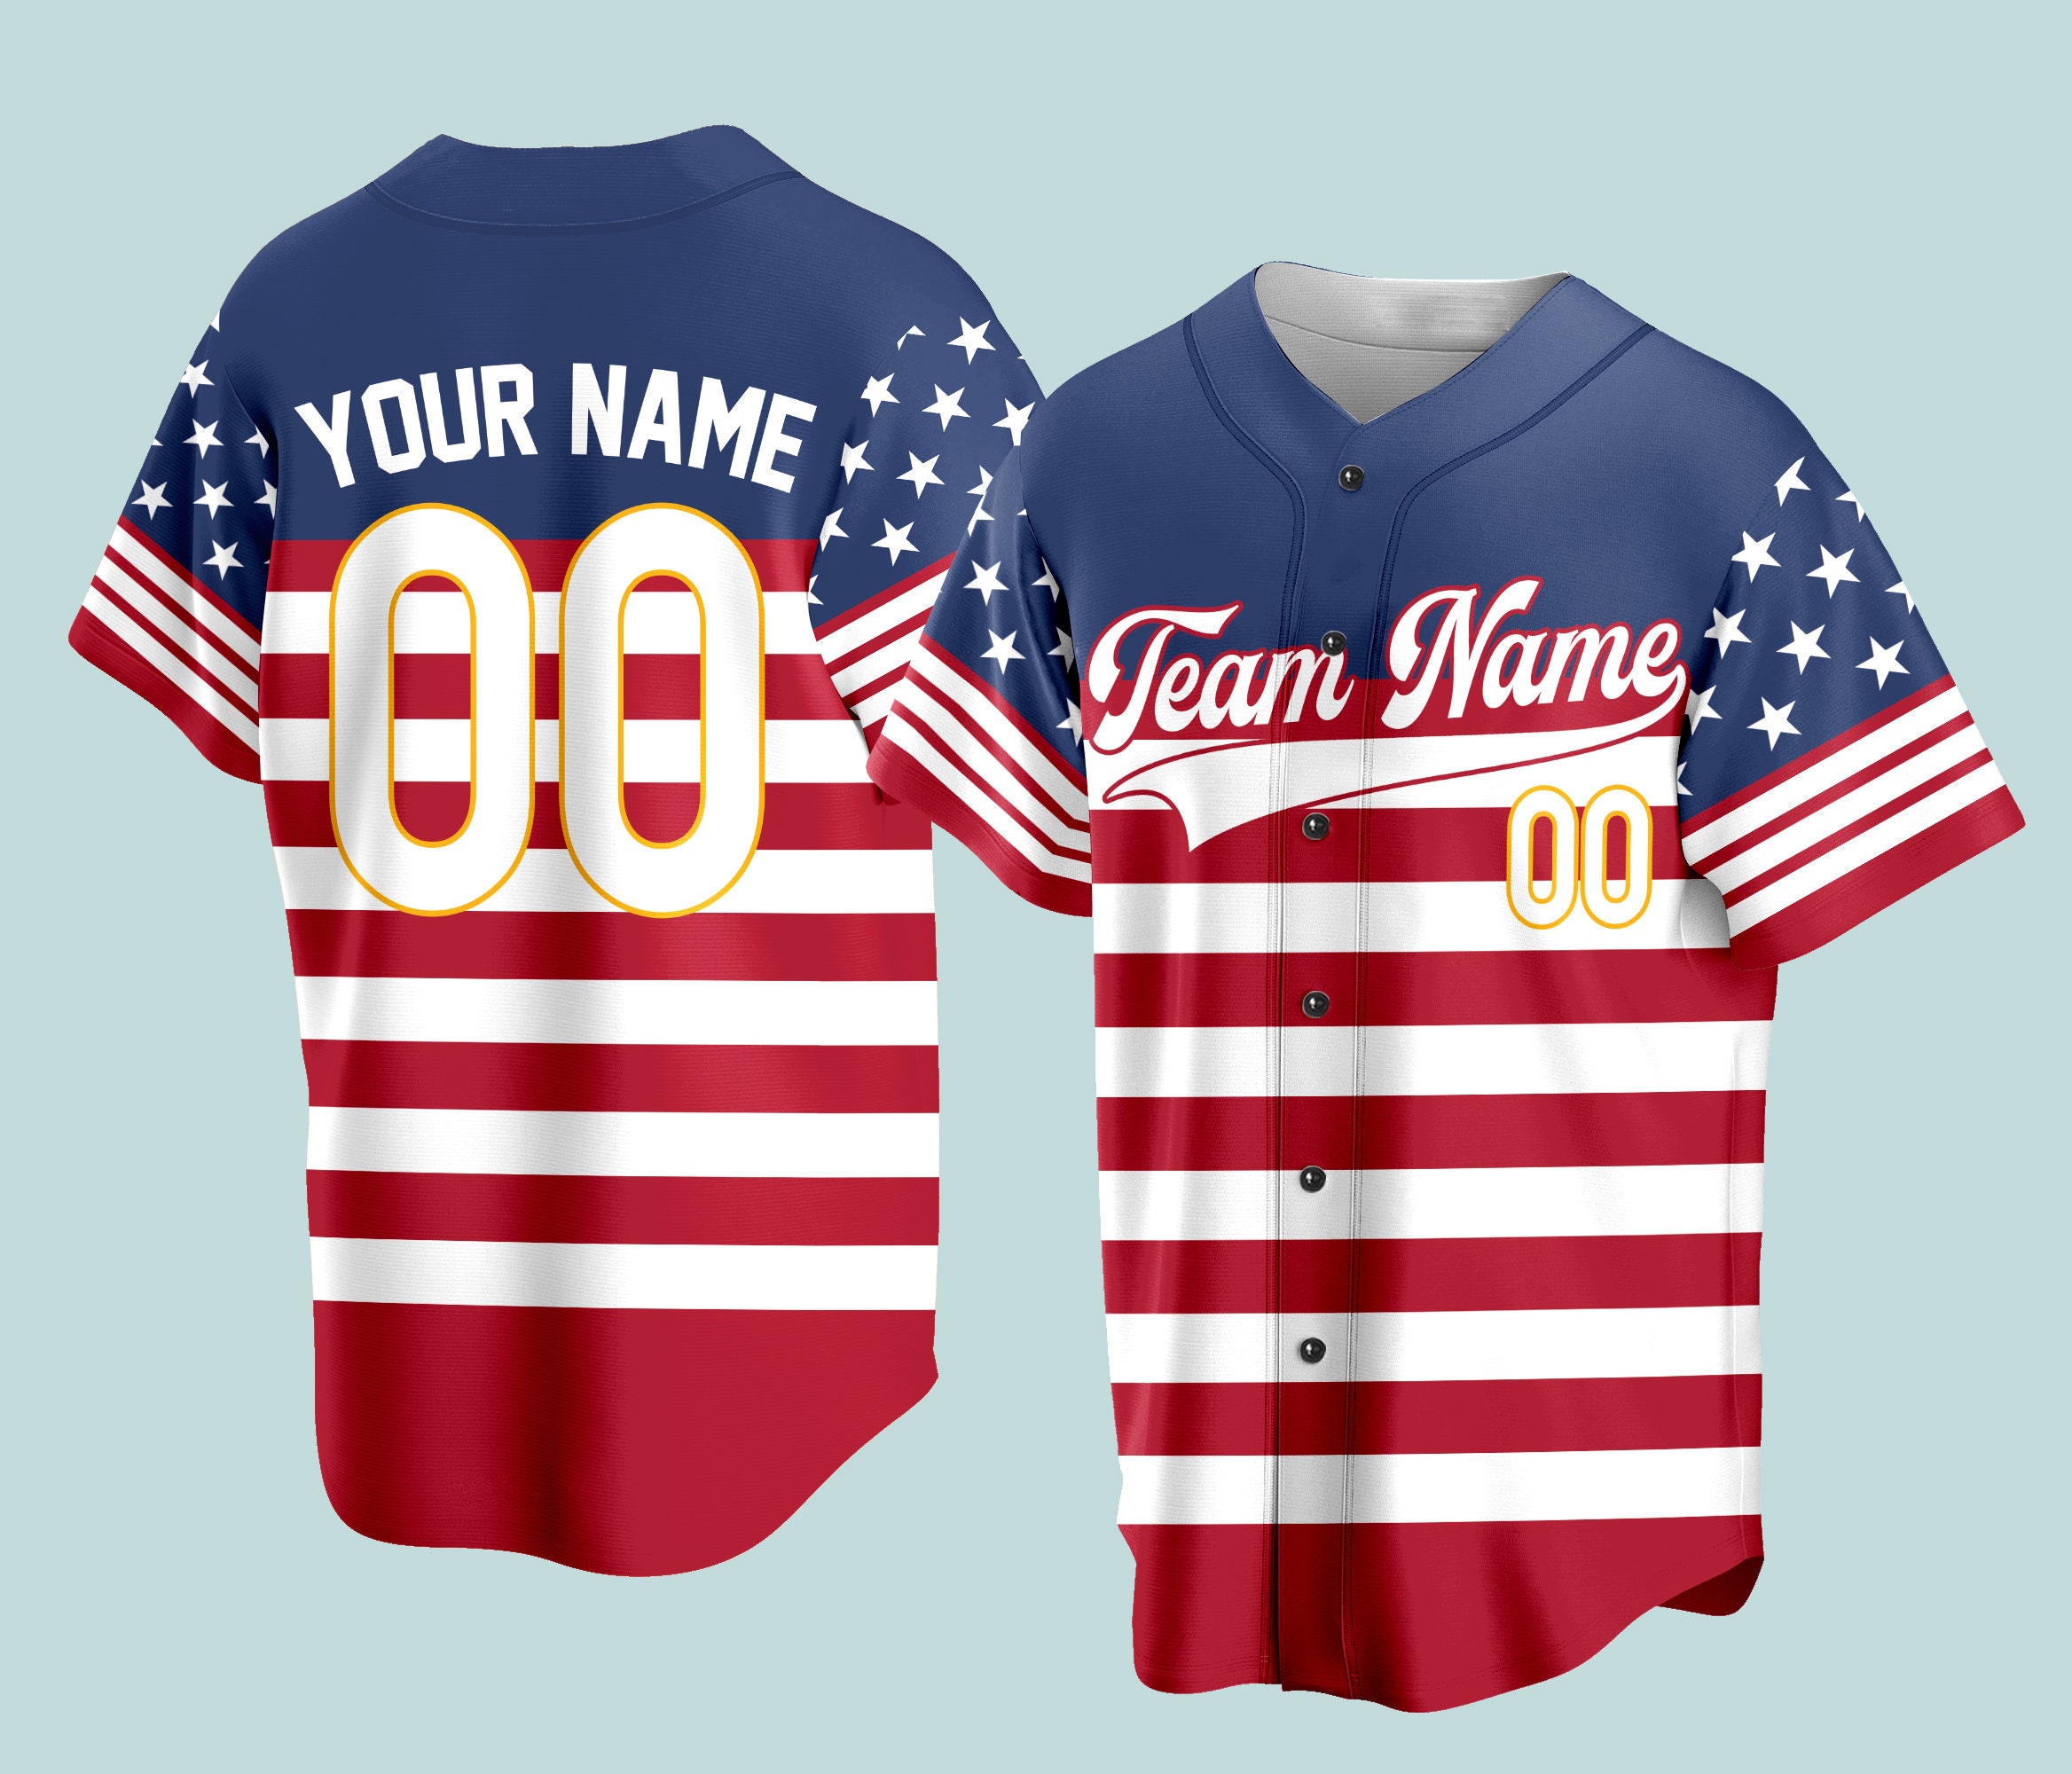 Custom American Flag Baseball Team Personalization Baseball Jersey Patriotic Outfit for Baseball Softball Player Gift for Independence Day